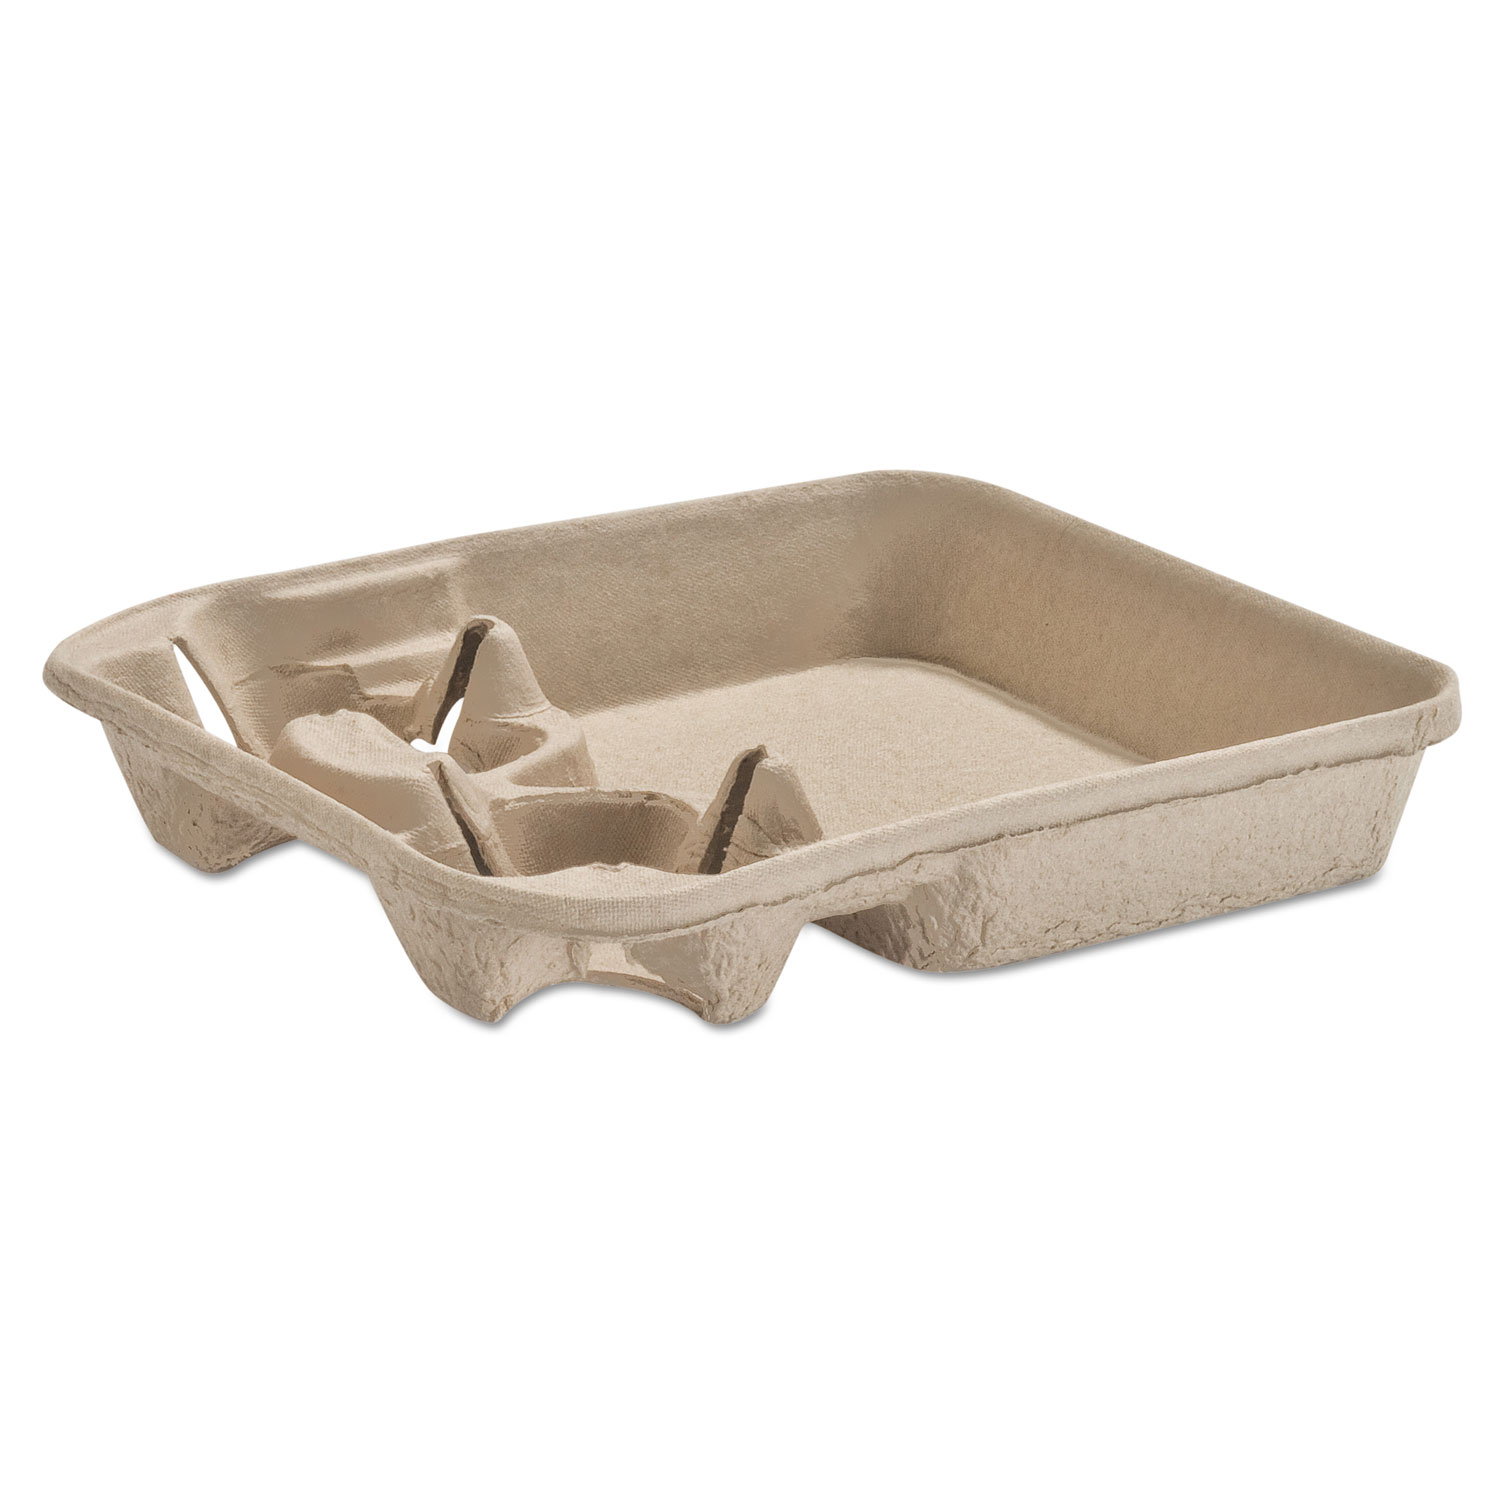  Chinet 20975 StrongHolder Molded Fiber Cup/Food Tray, 8-22oz, Two Cups, 250/Carton (HUH20975) 